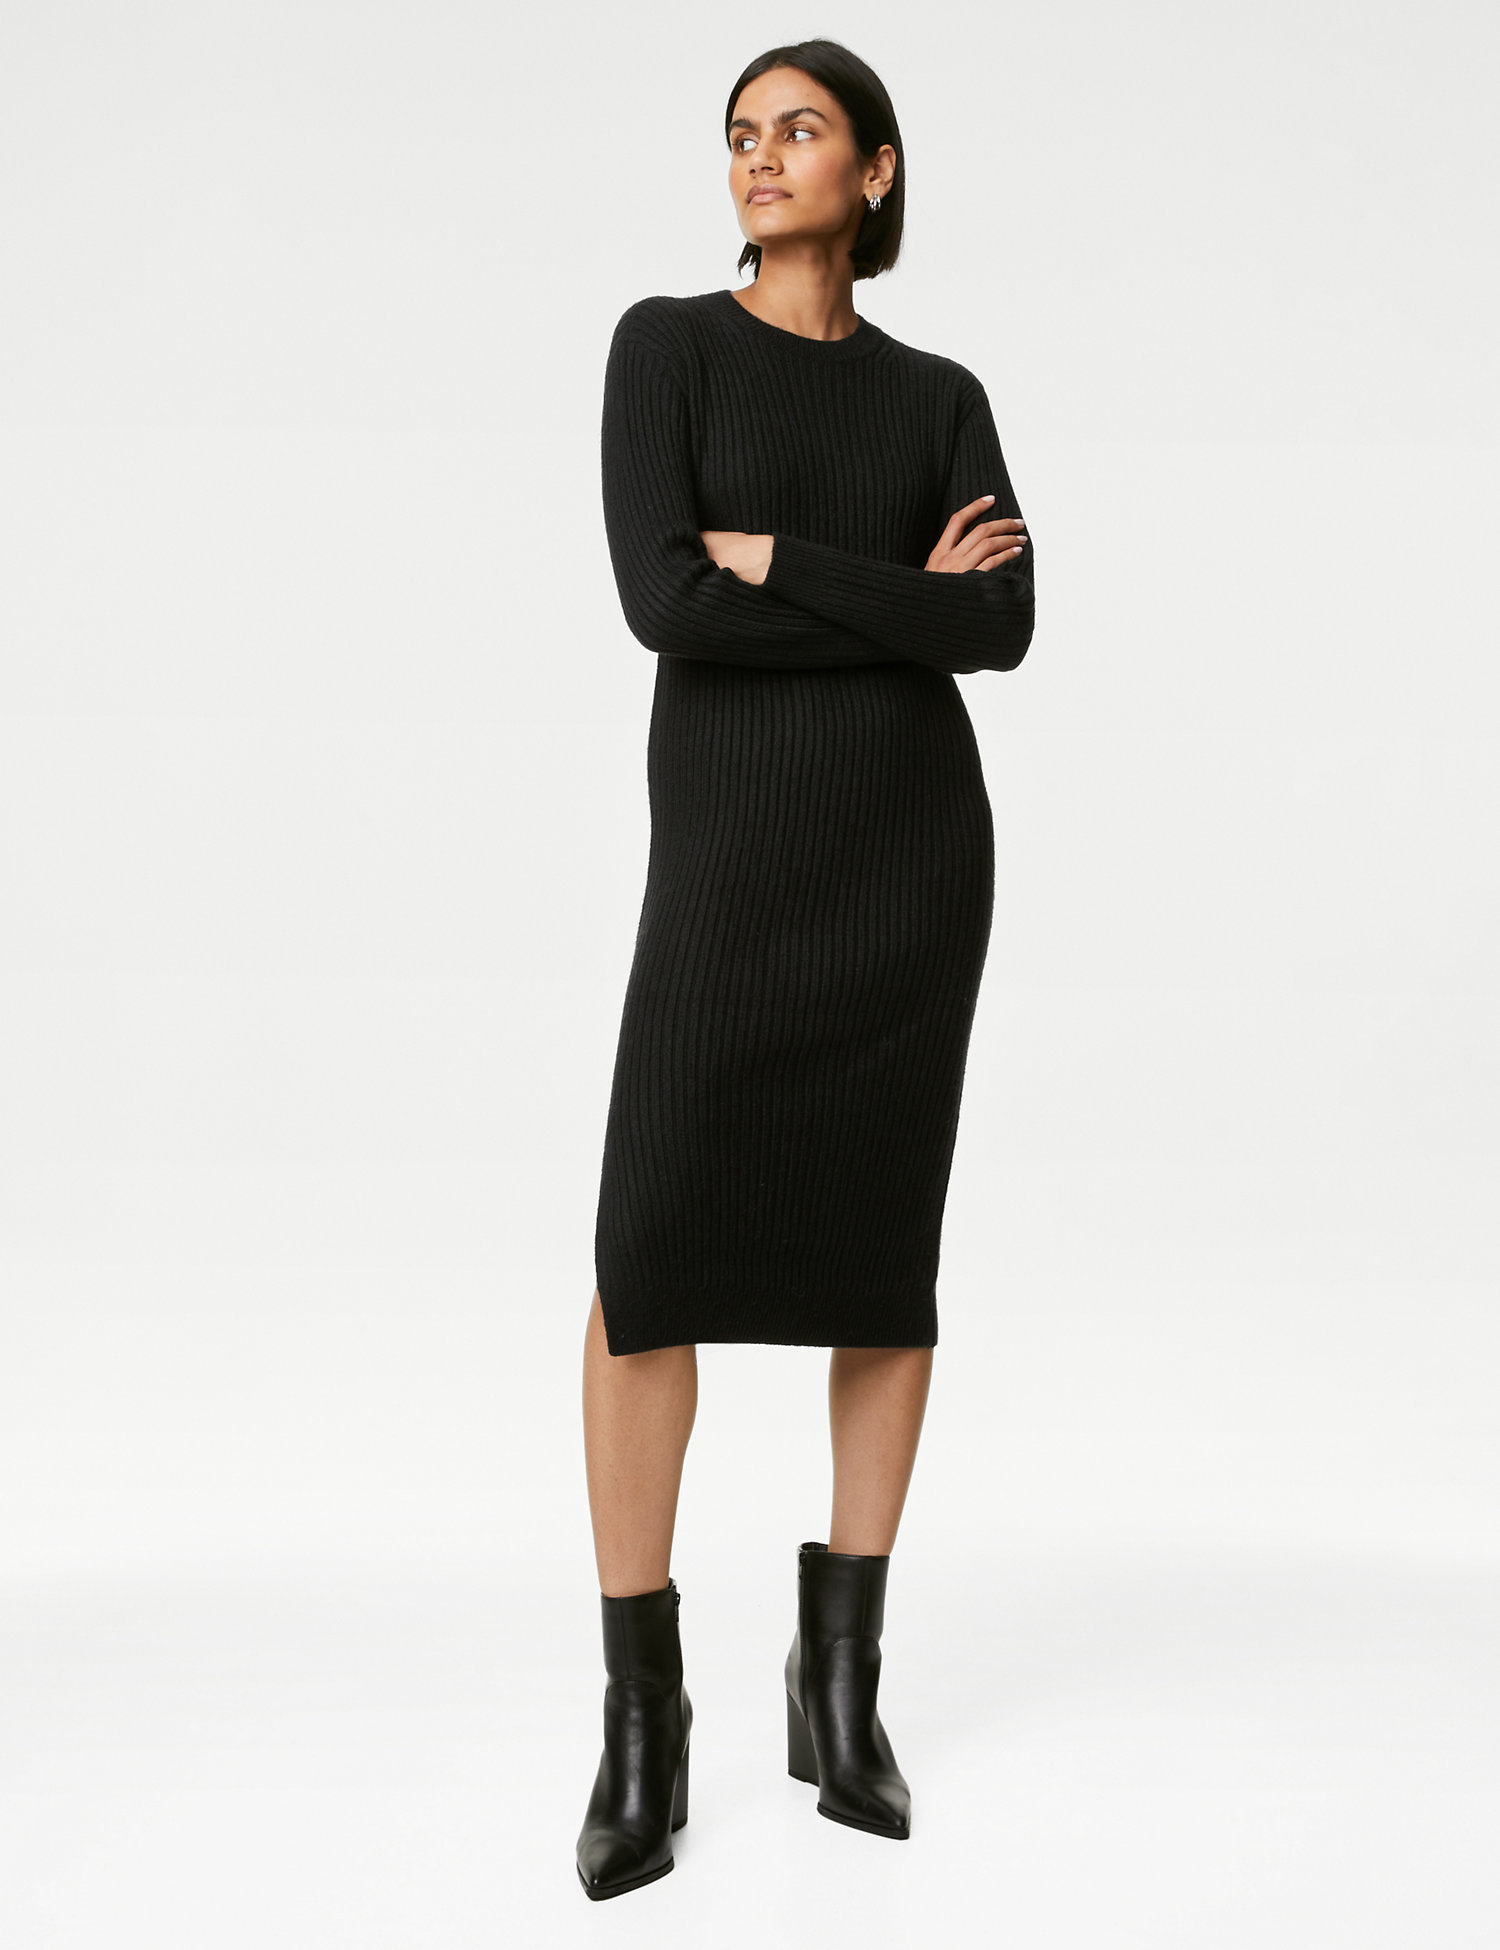 The Best Knitted Dresses to Buy Now | Who What Wear UK